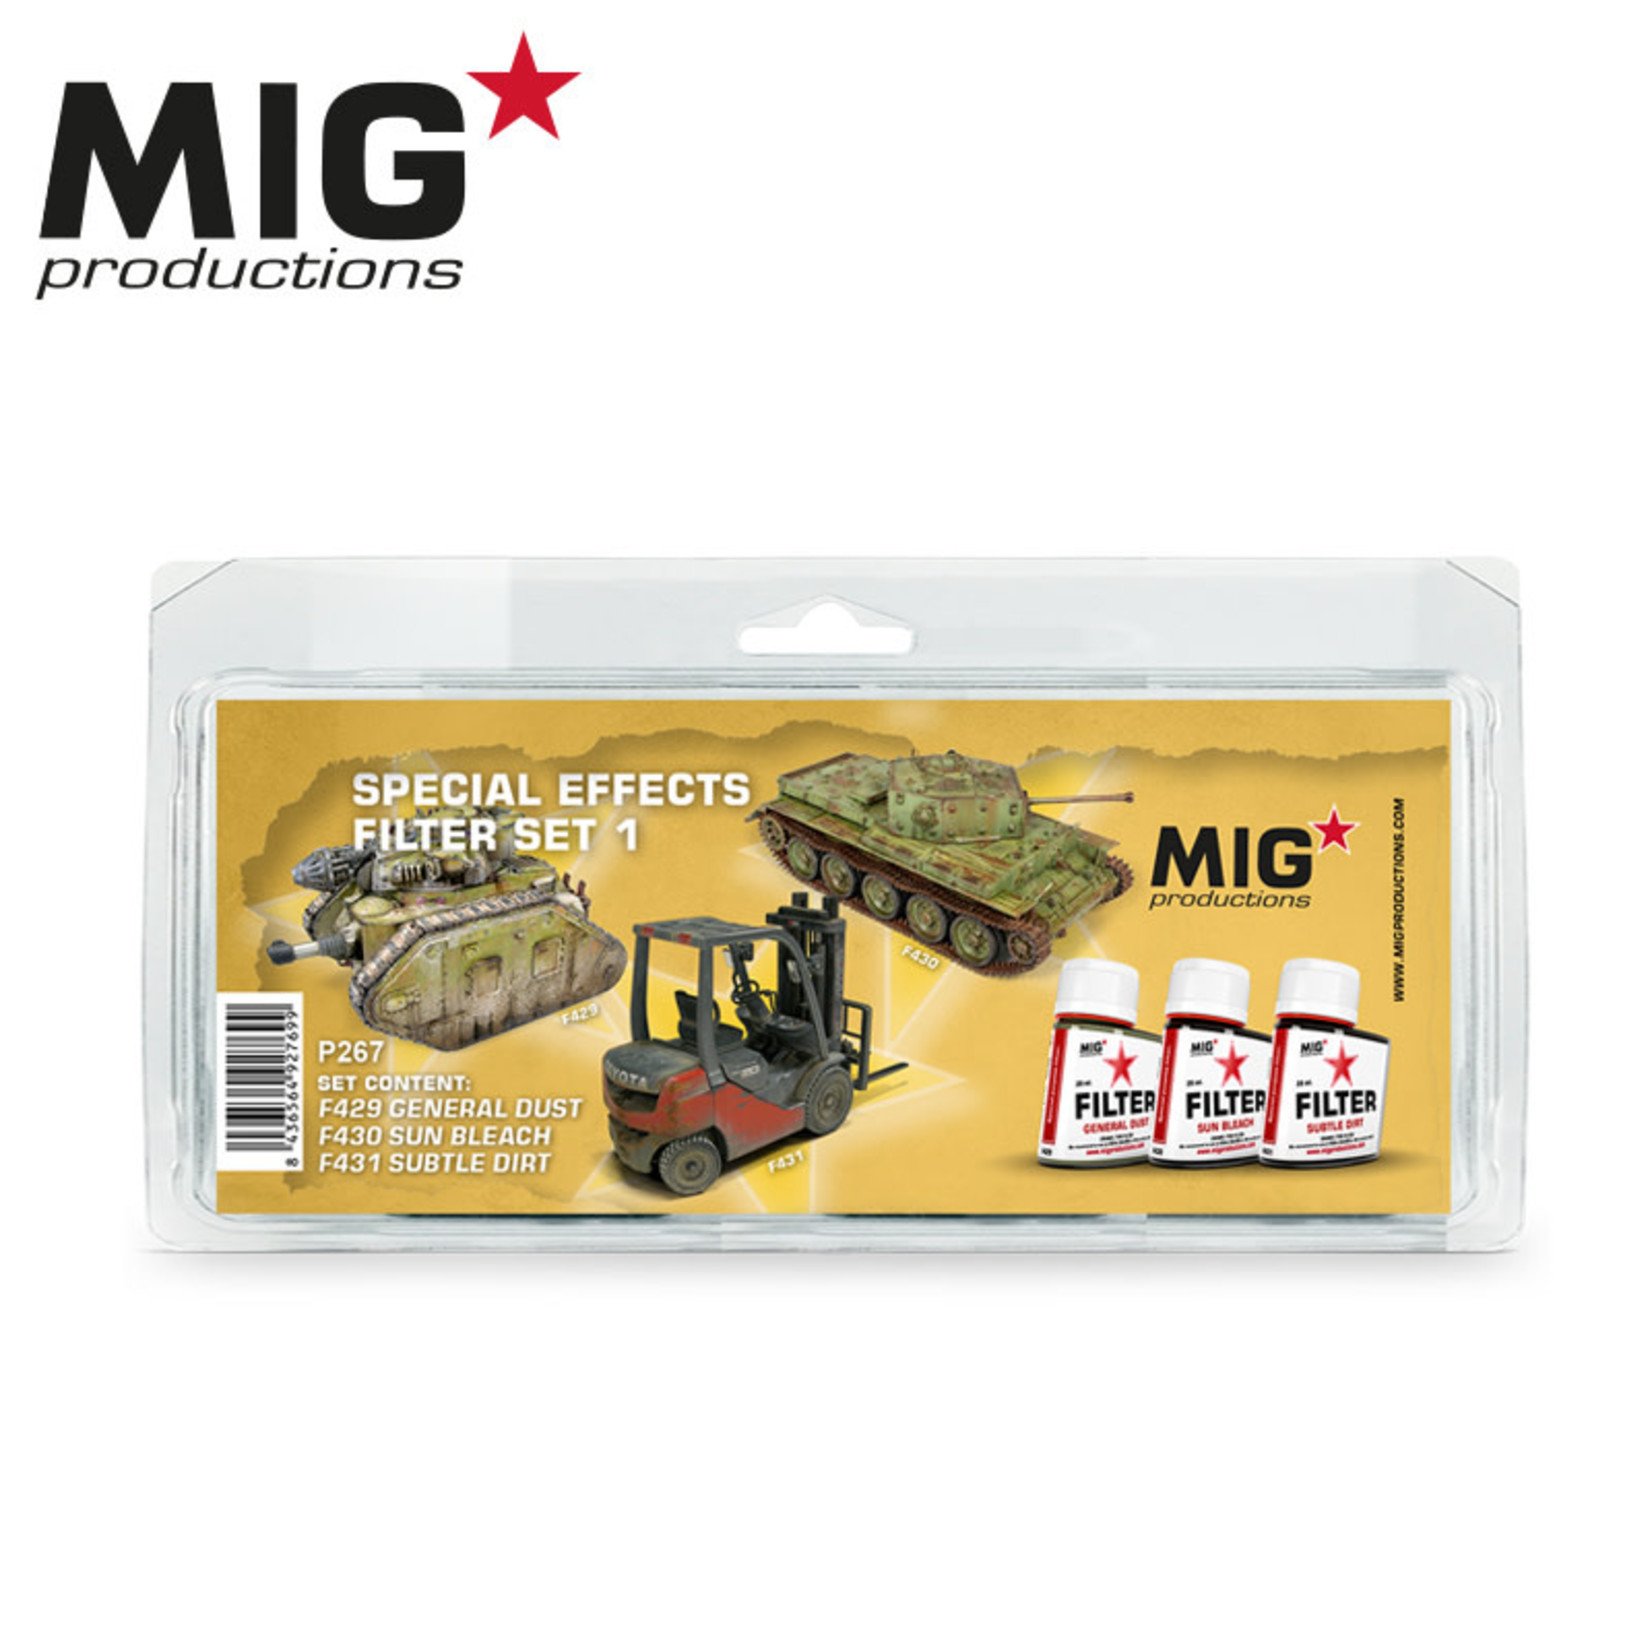 MIG Productions MIG Filter P267 Special Effects Filters #1 (3) Set